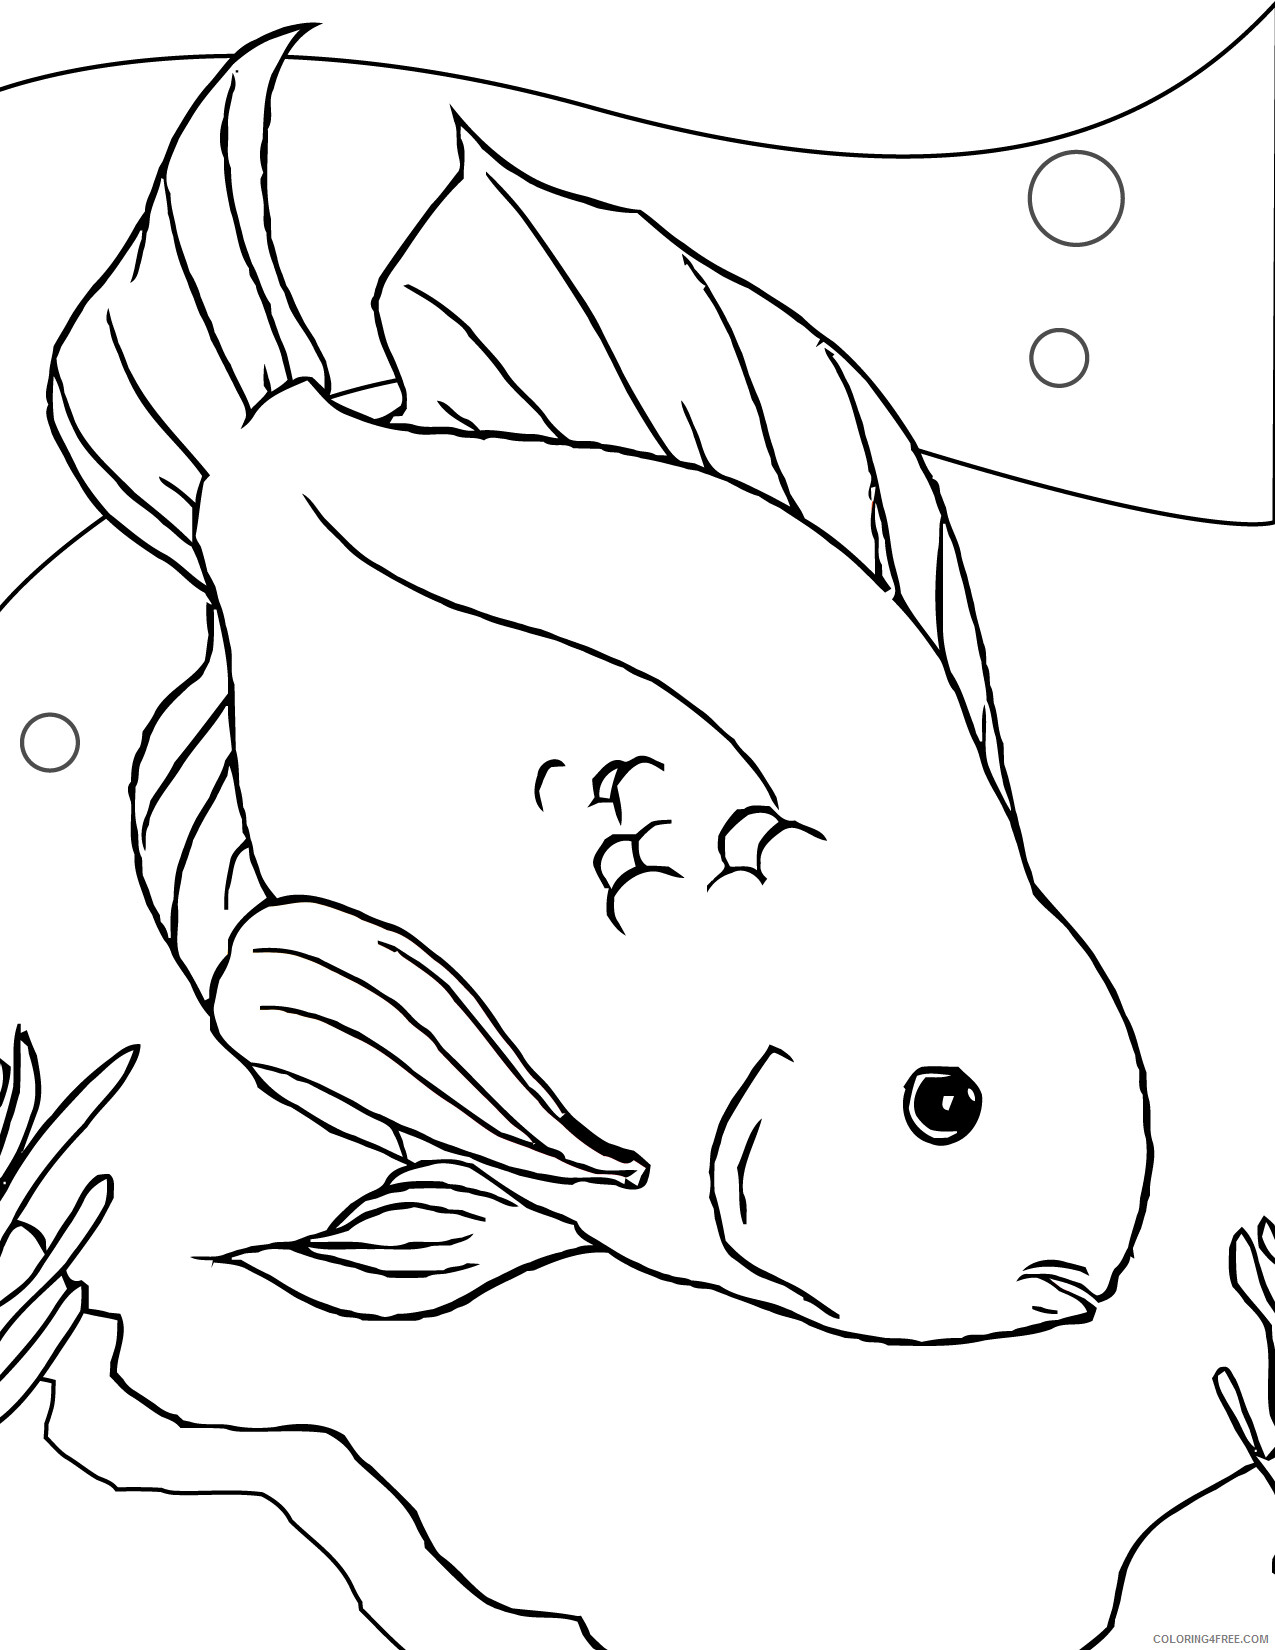 Fish Coloring Pages Animal Printable Sheets of a Fish 2021 2069 Coloring4free